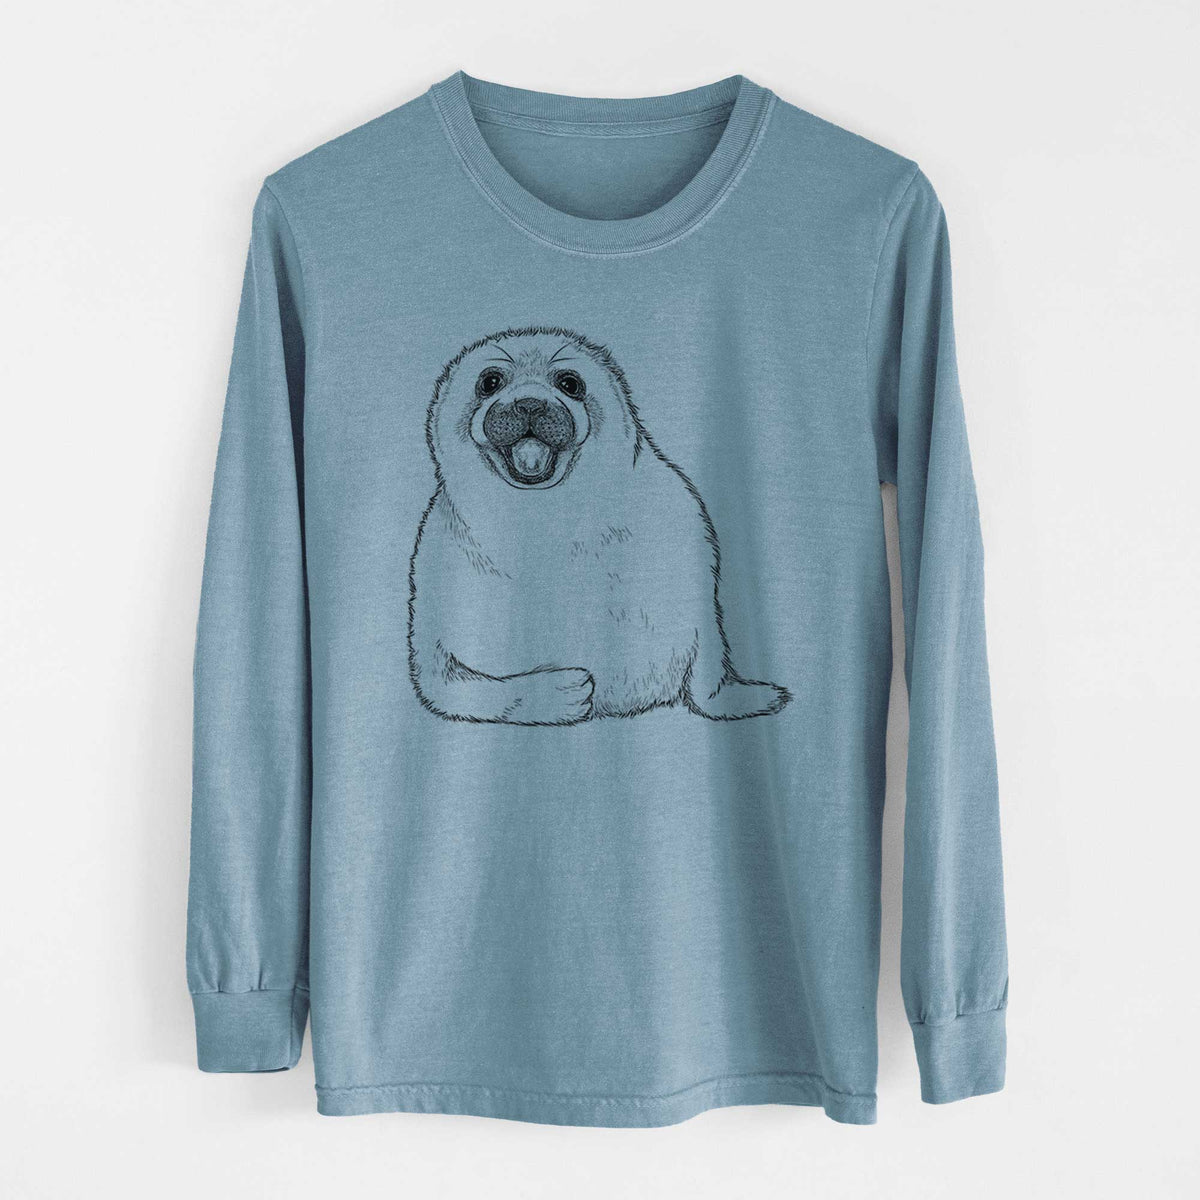 Harp Seal Pup - Pagophilus groenlandicus - Heavyweight 100% Cotton Long Sleeve